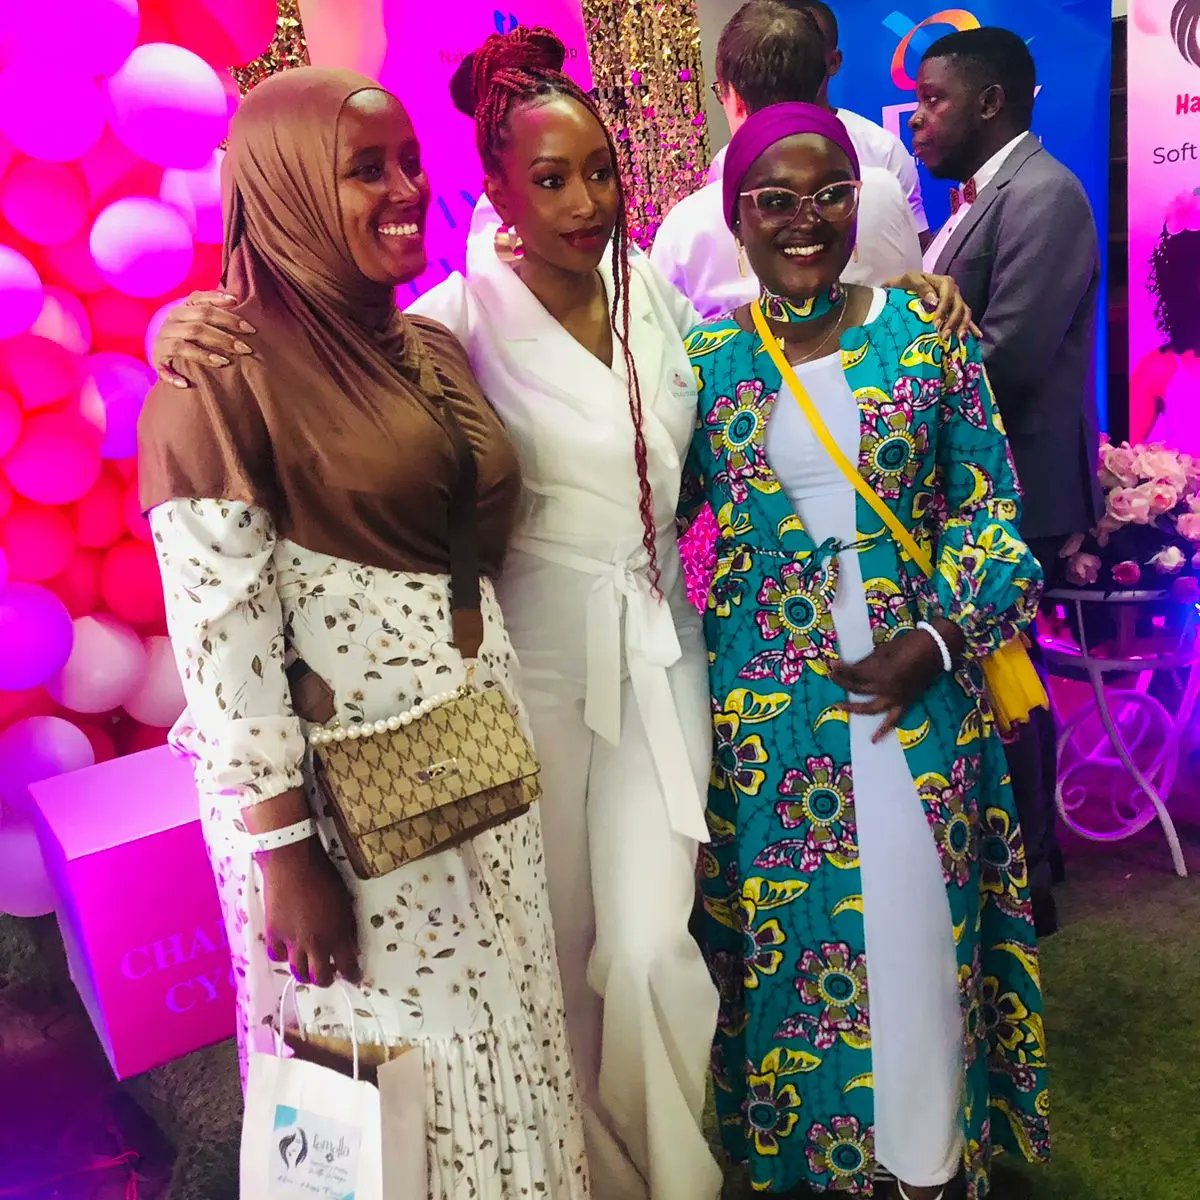 Over the weekend, we joined other key practitioners, advocates and allies who work in the Menstrual Hygiene Management space for the learning and networking event on #ChangingCycles that was convened by @inuadada & @officialjanetmbugua...